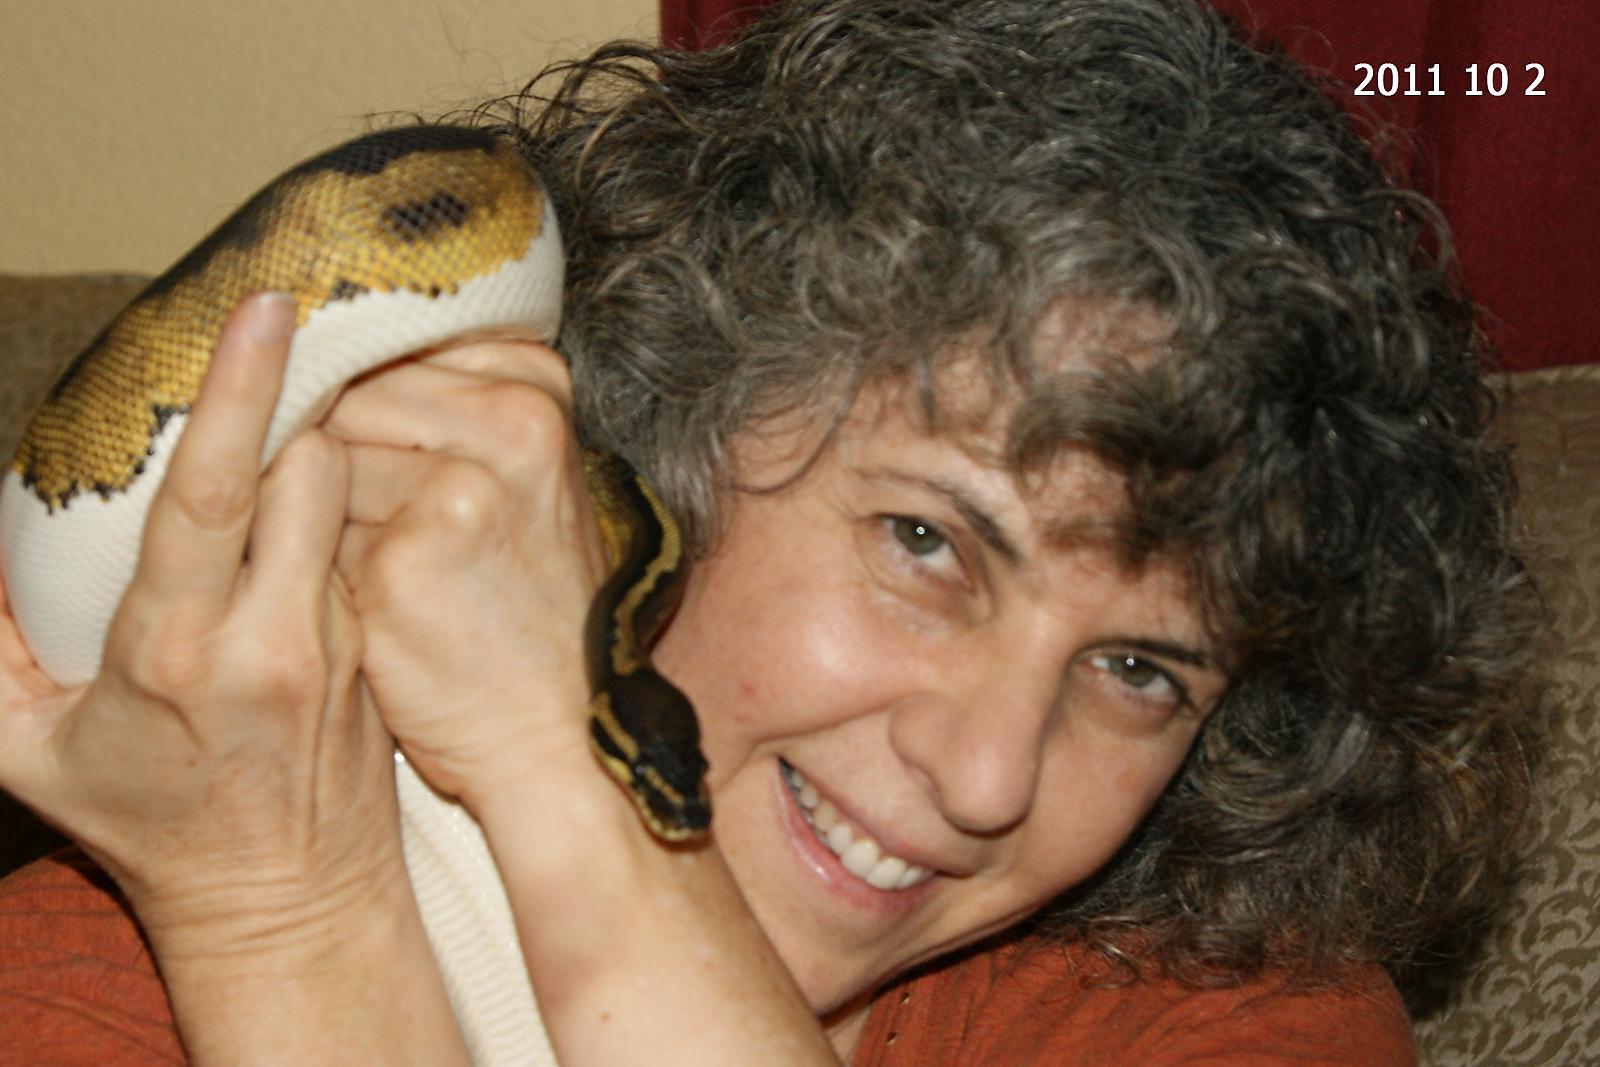 Me and Lacey, my Piebald Ball Python